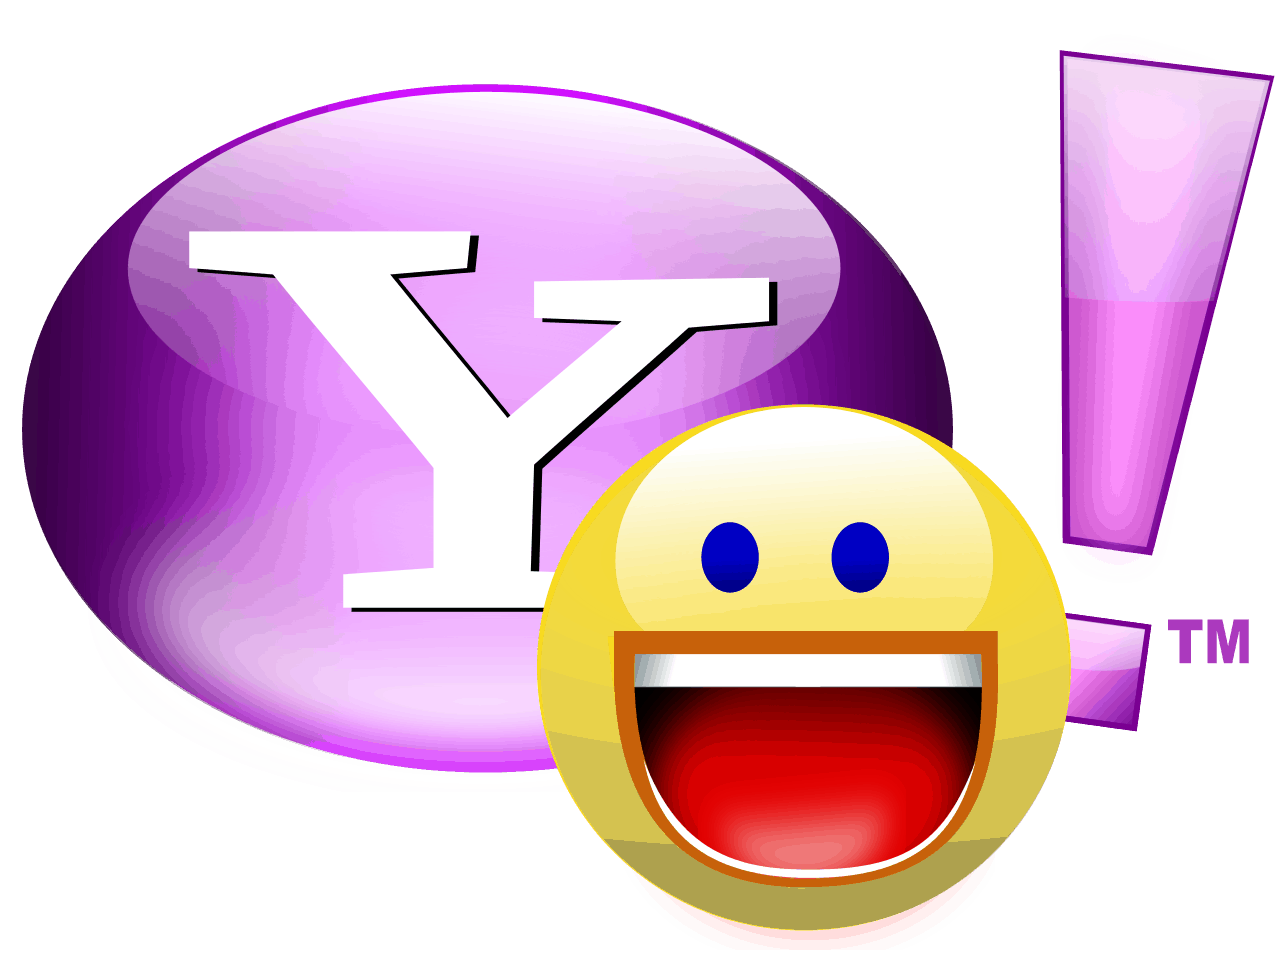 Yahoo could relaunch its Messenger app tomorrow.